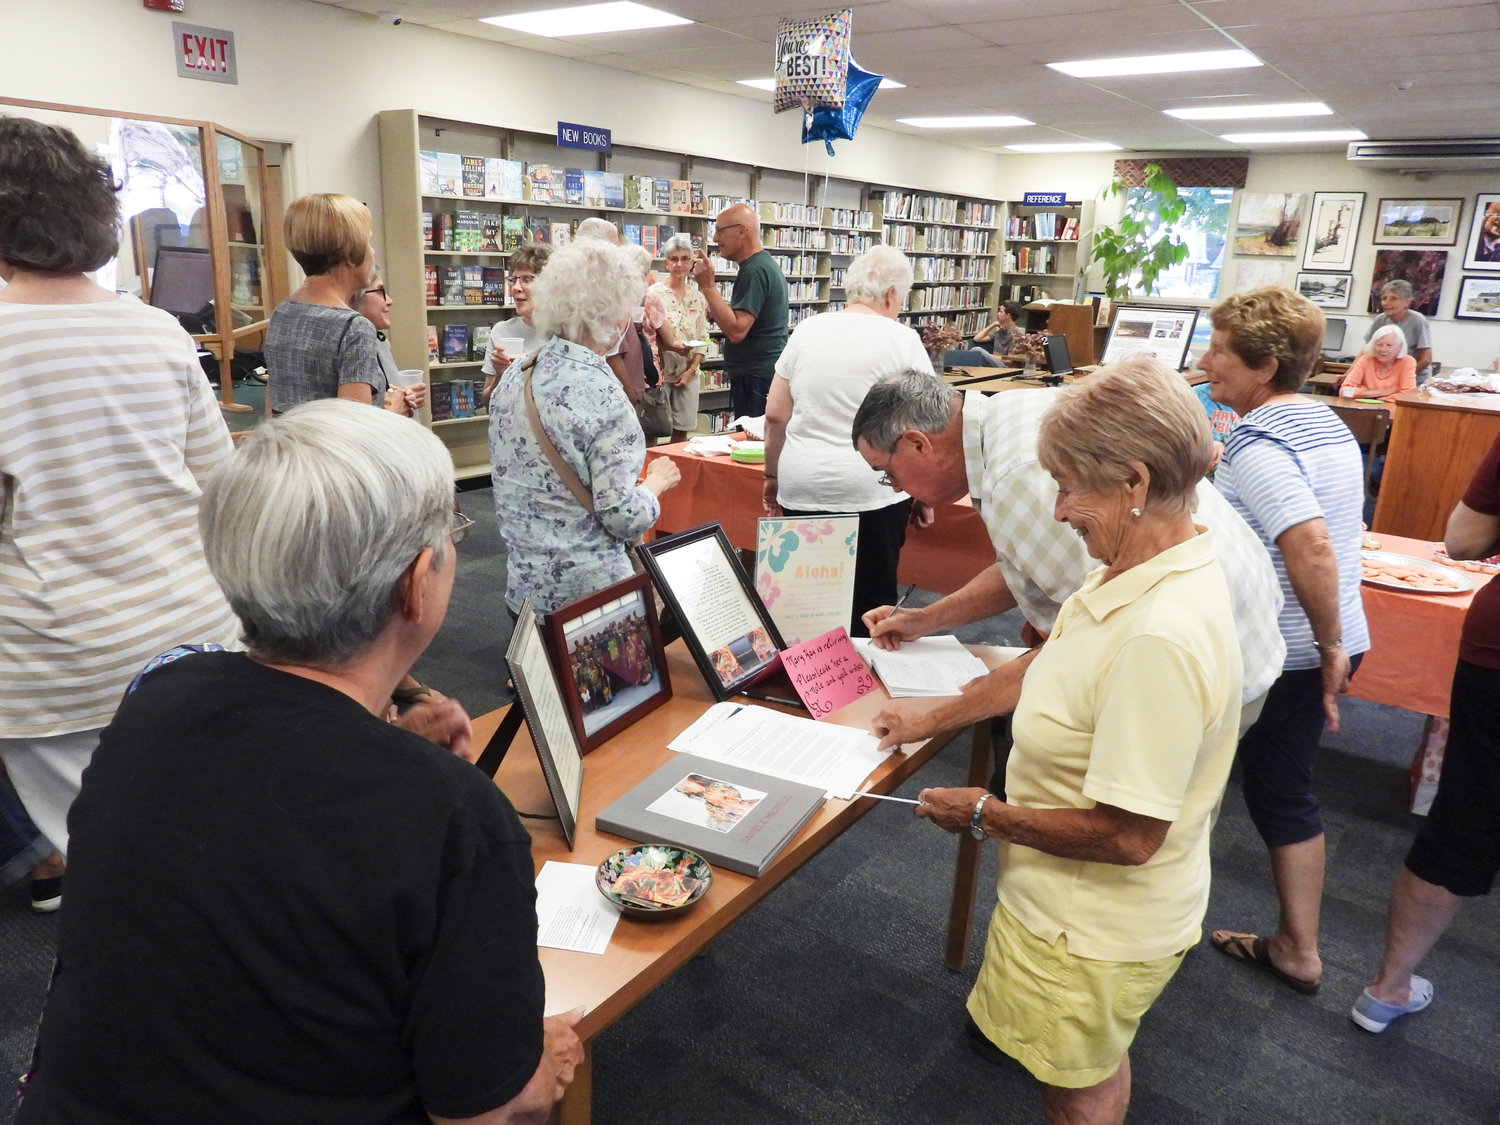 Local residents and patrons attend the Aloha Celebration and Reception at the Sherrill-Kenwood Library, wishing Mary Kay Junglen a happy retirement and welcoming new Library Manager Bill Loveland